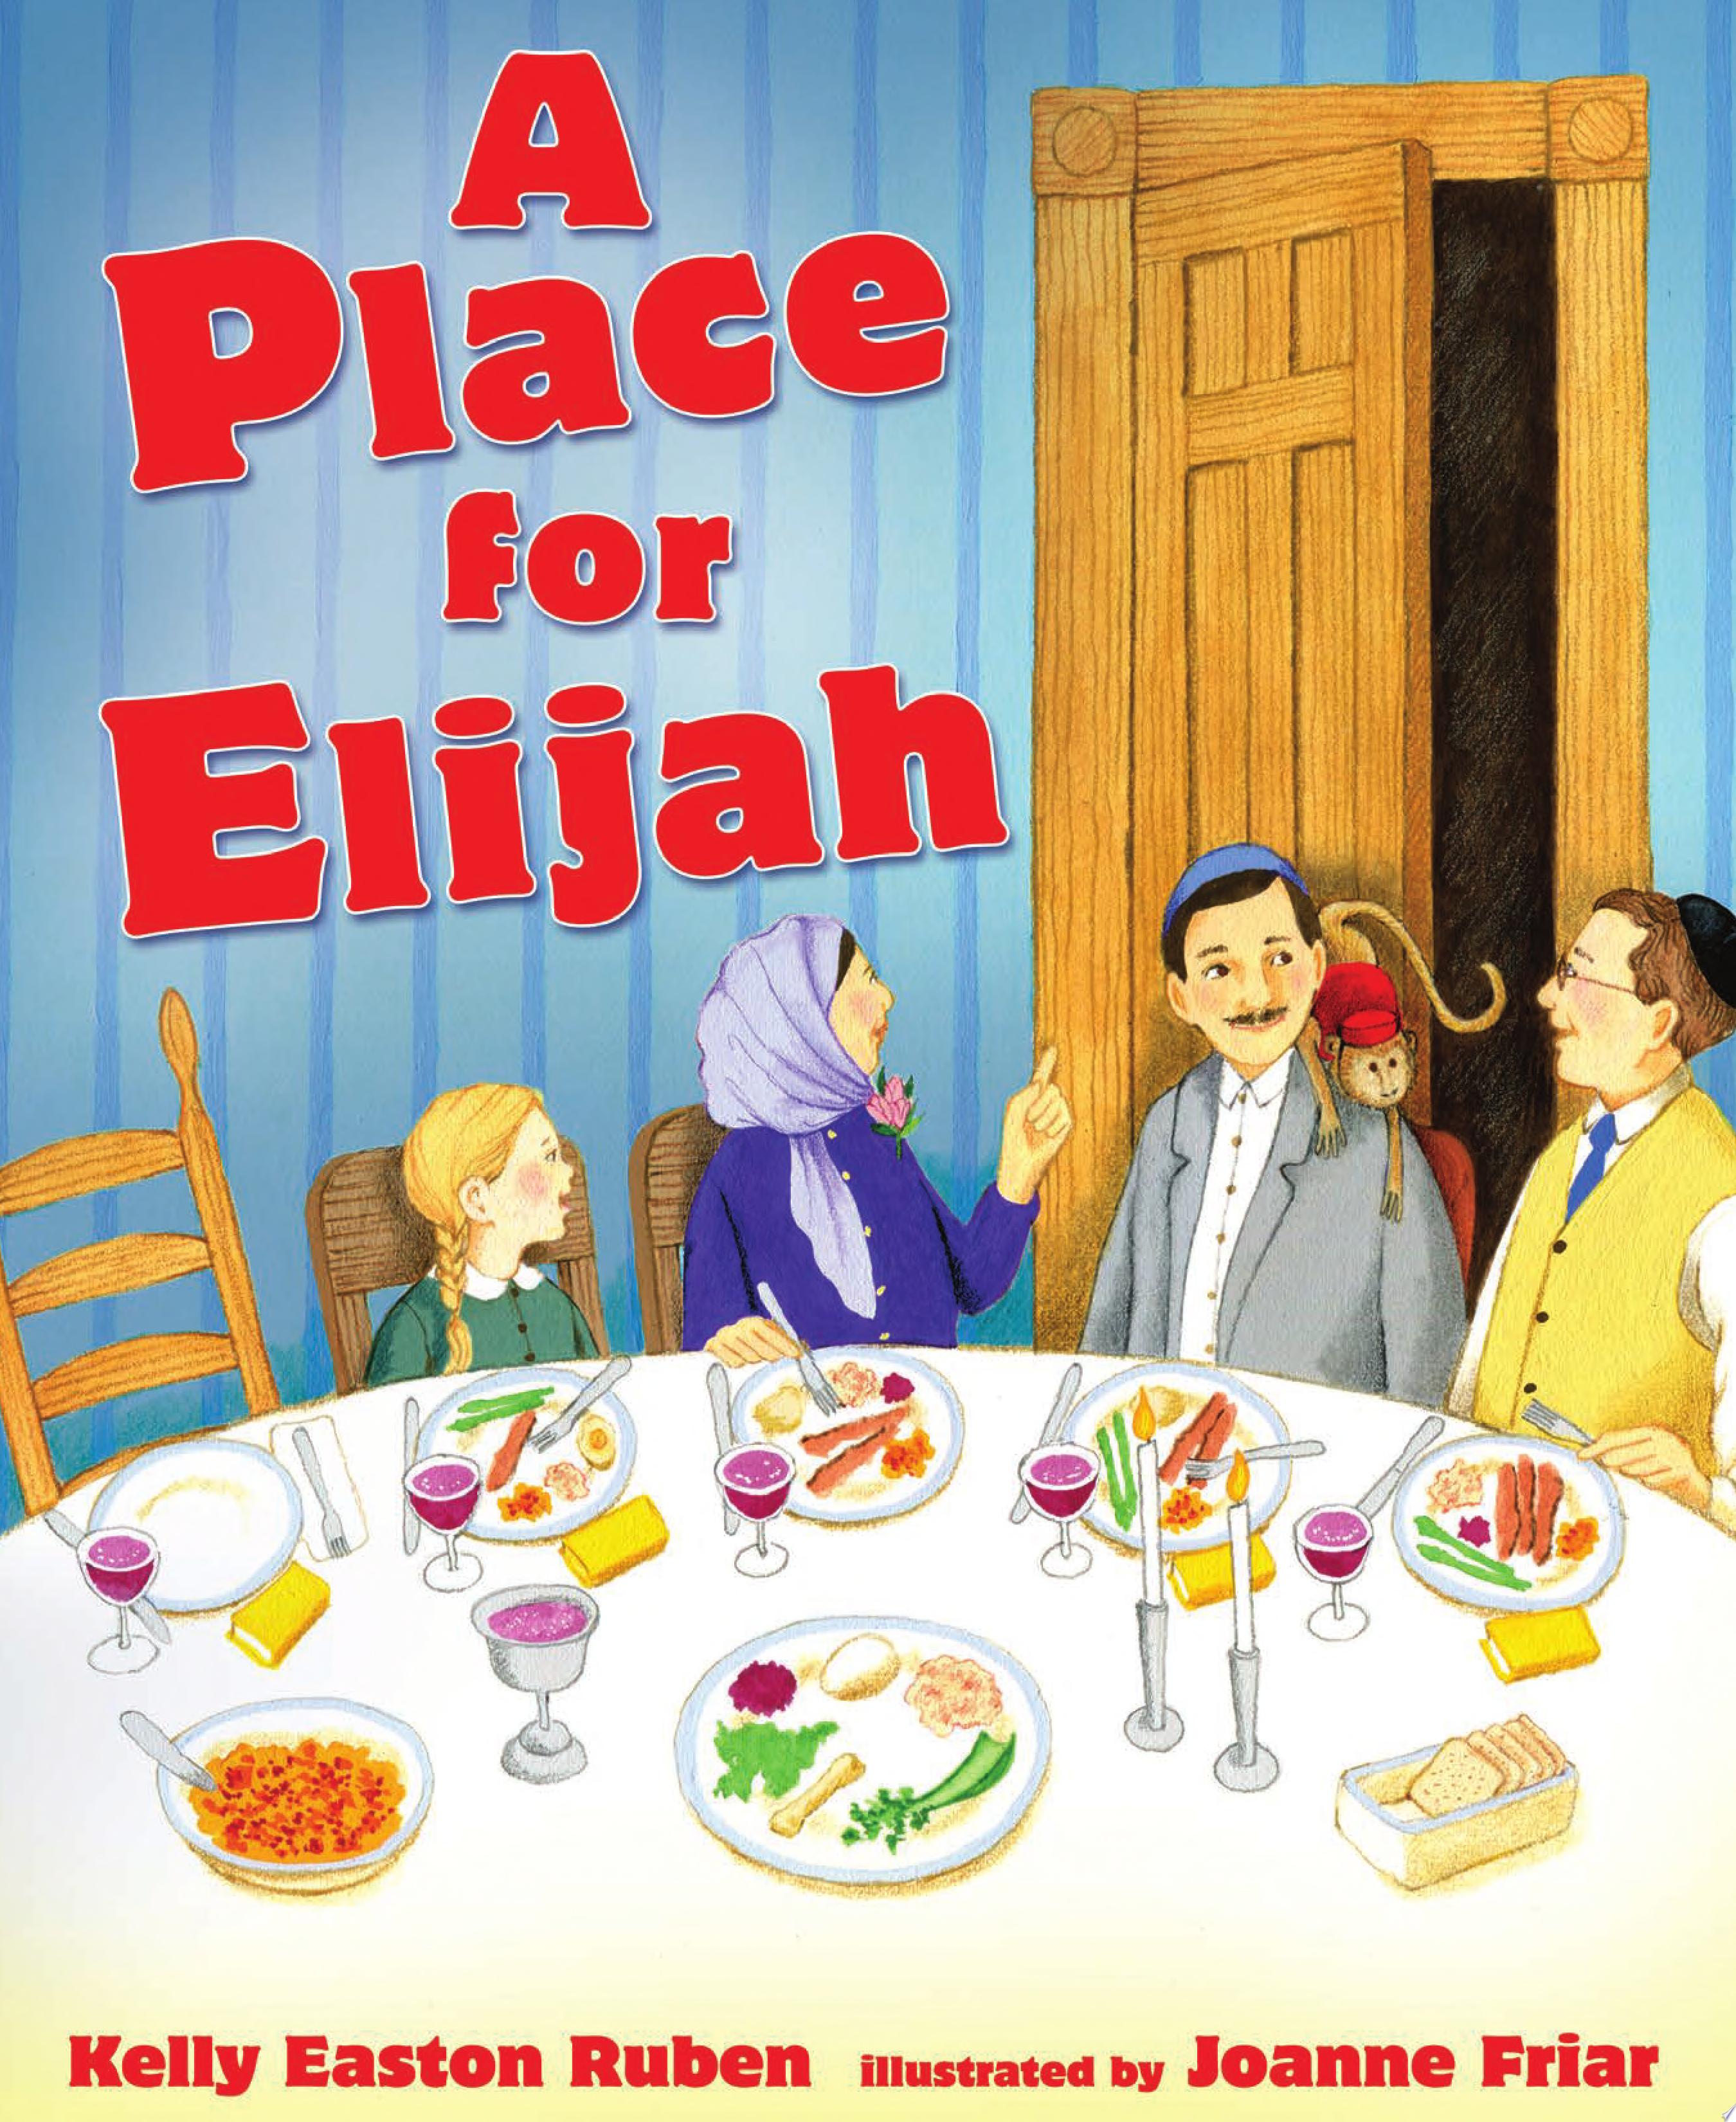 Image for "A Place for Elijah"